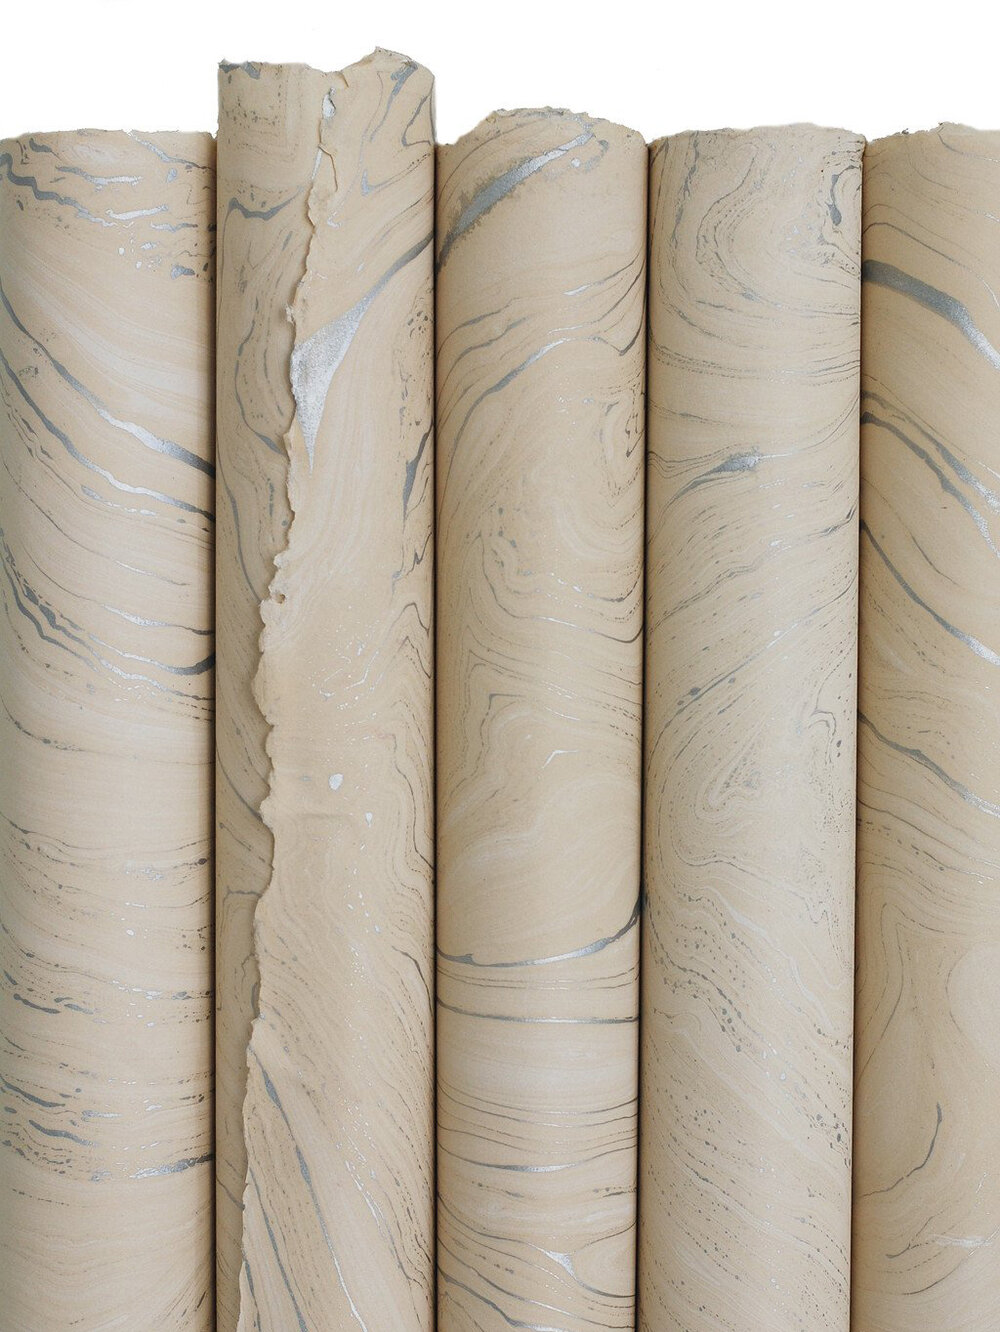 Cream and Silver Marble Wrapping Paper — Jonathan Wright and Company